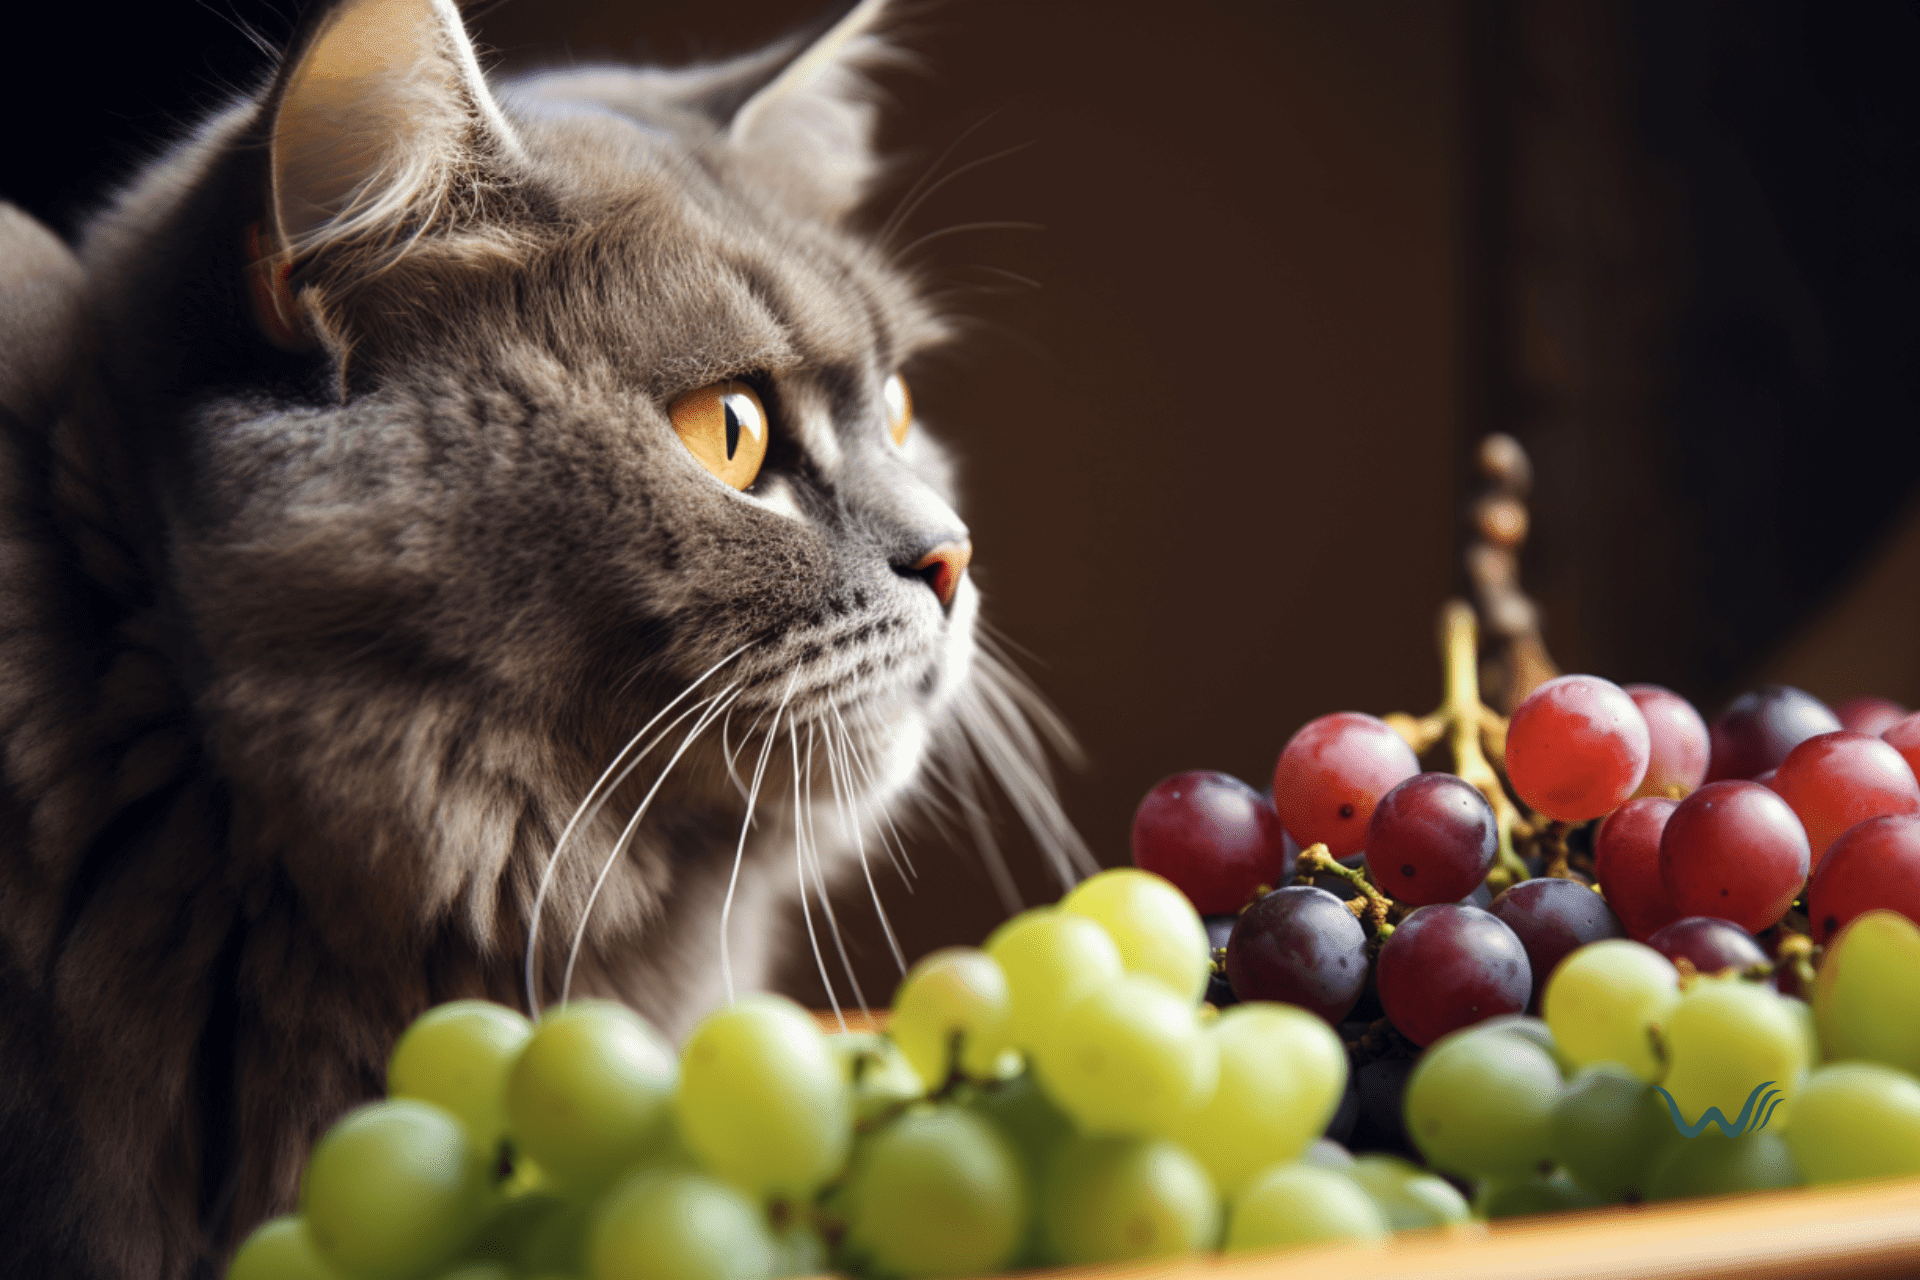 are grapes a safe snack for cats